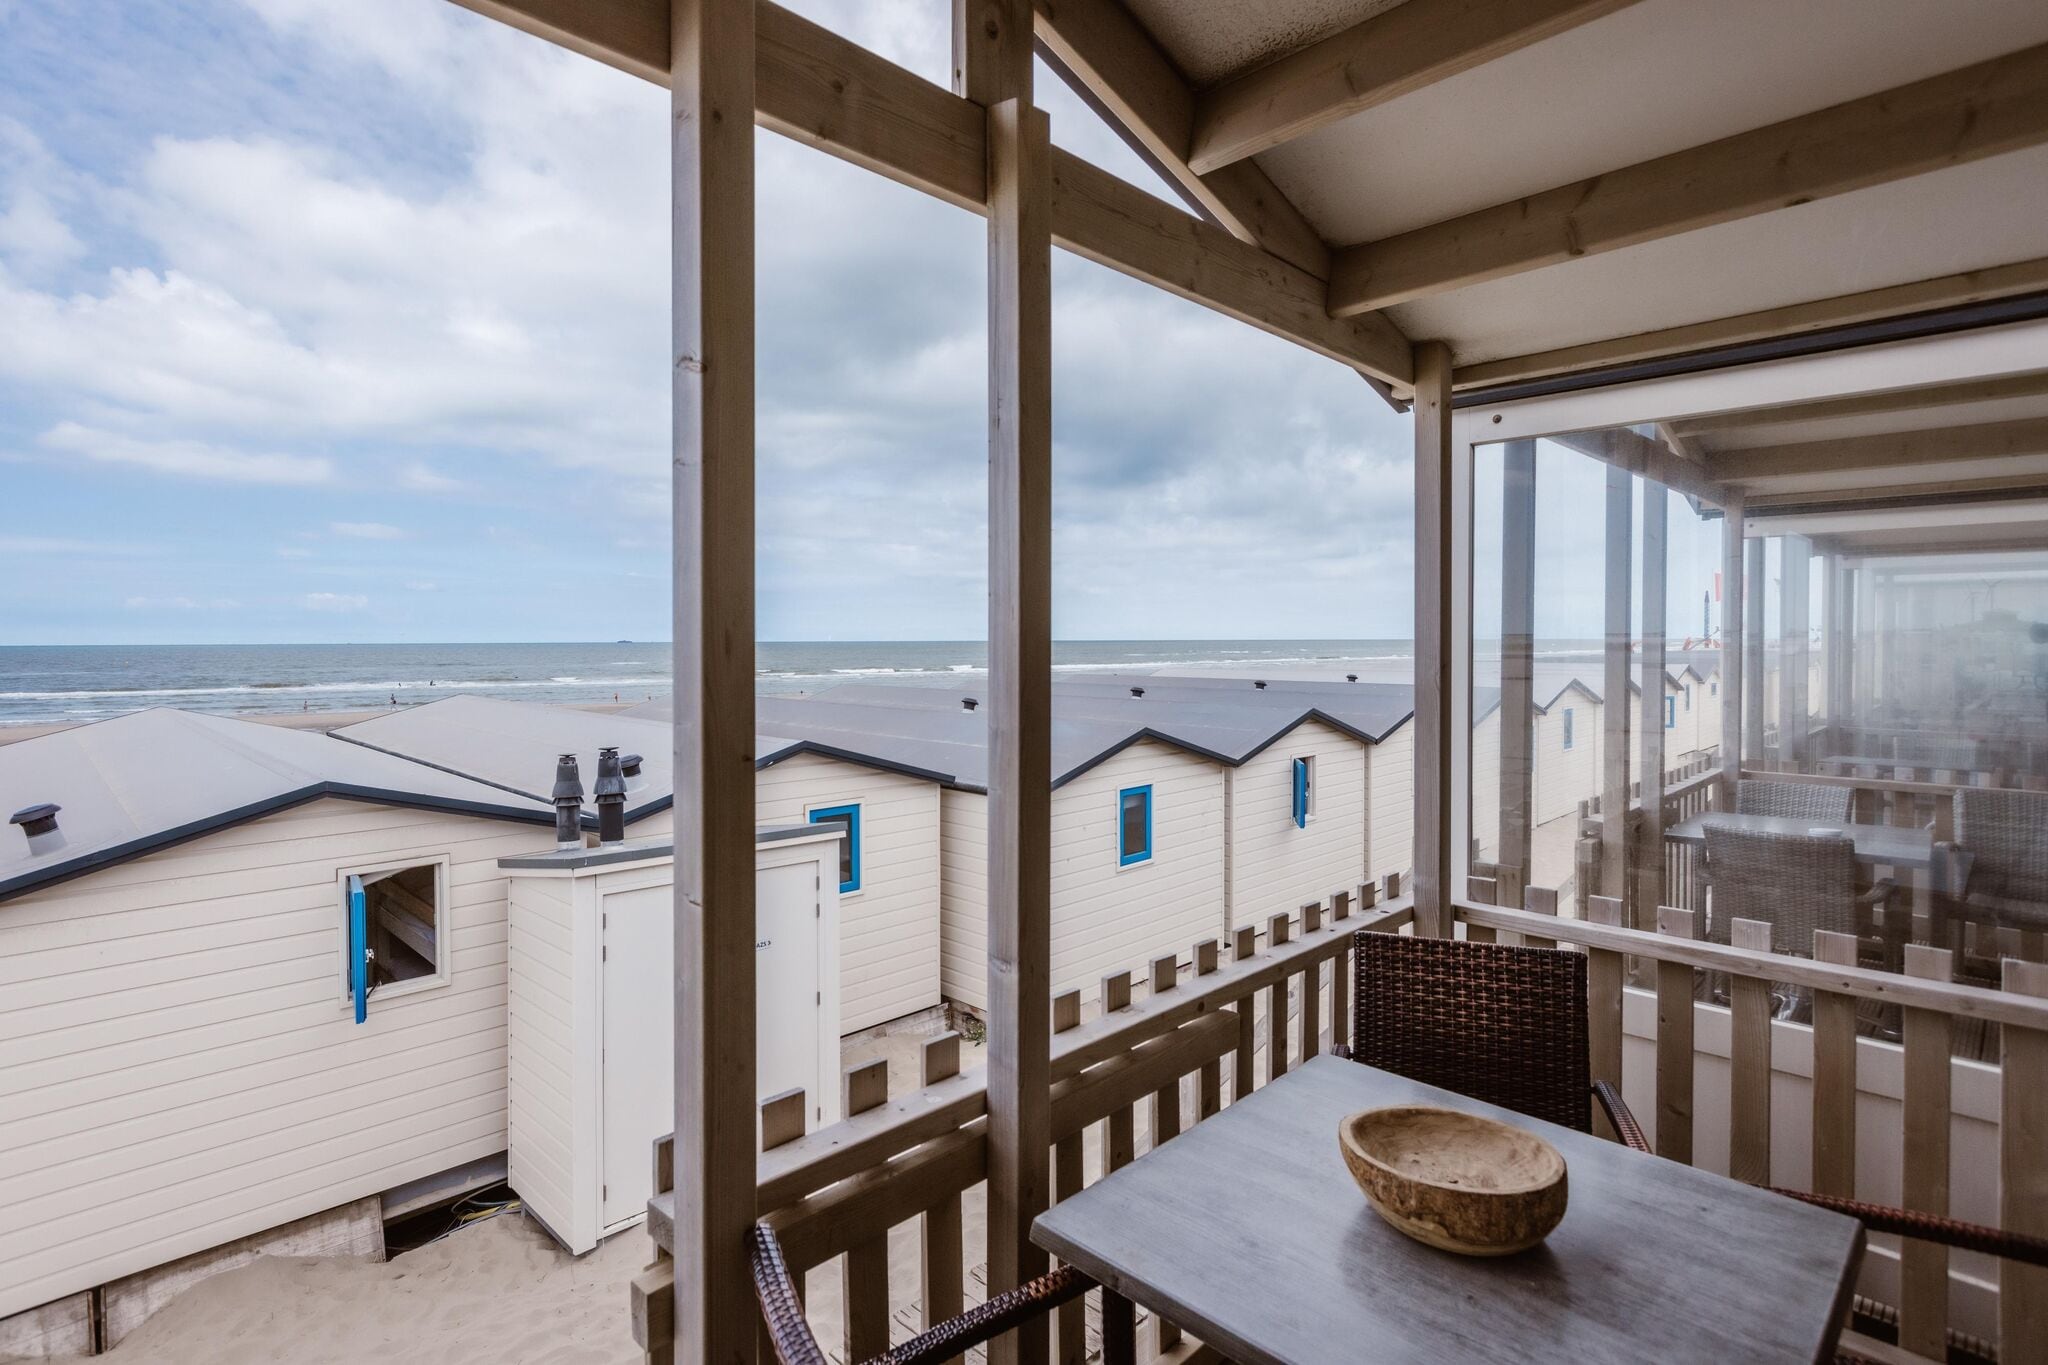 Beautifully located holiday home directly on the North Sea beach of Wijk aan Zee